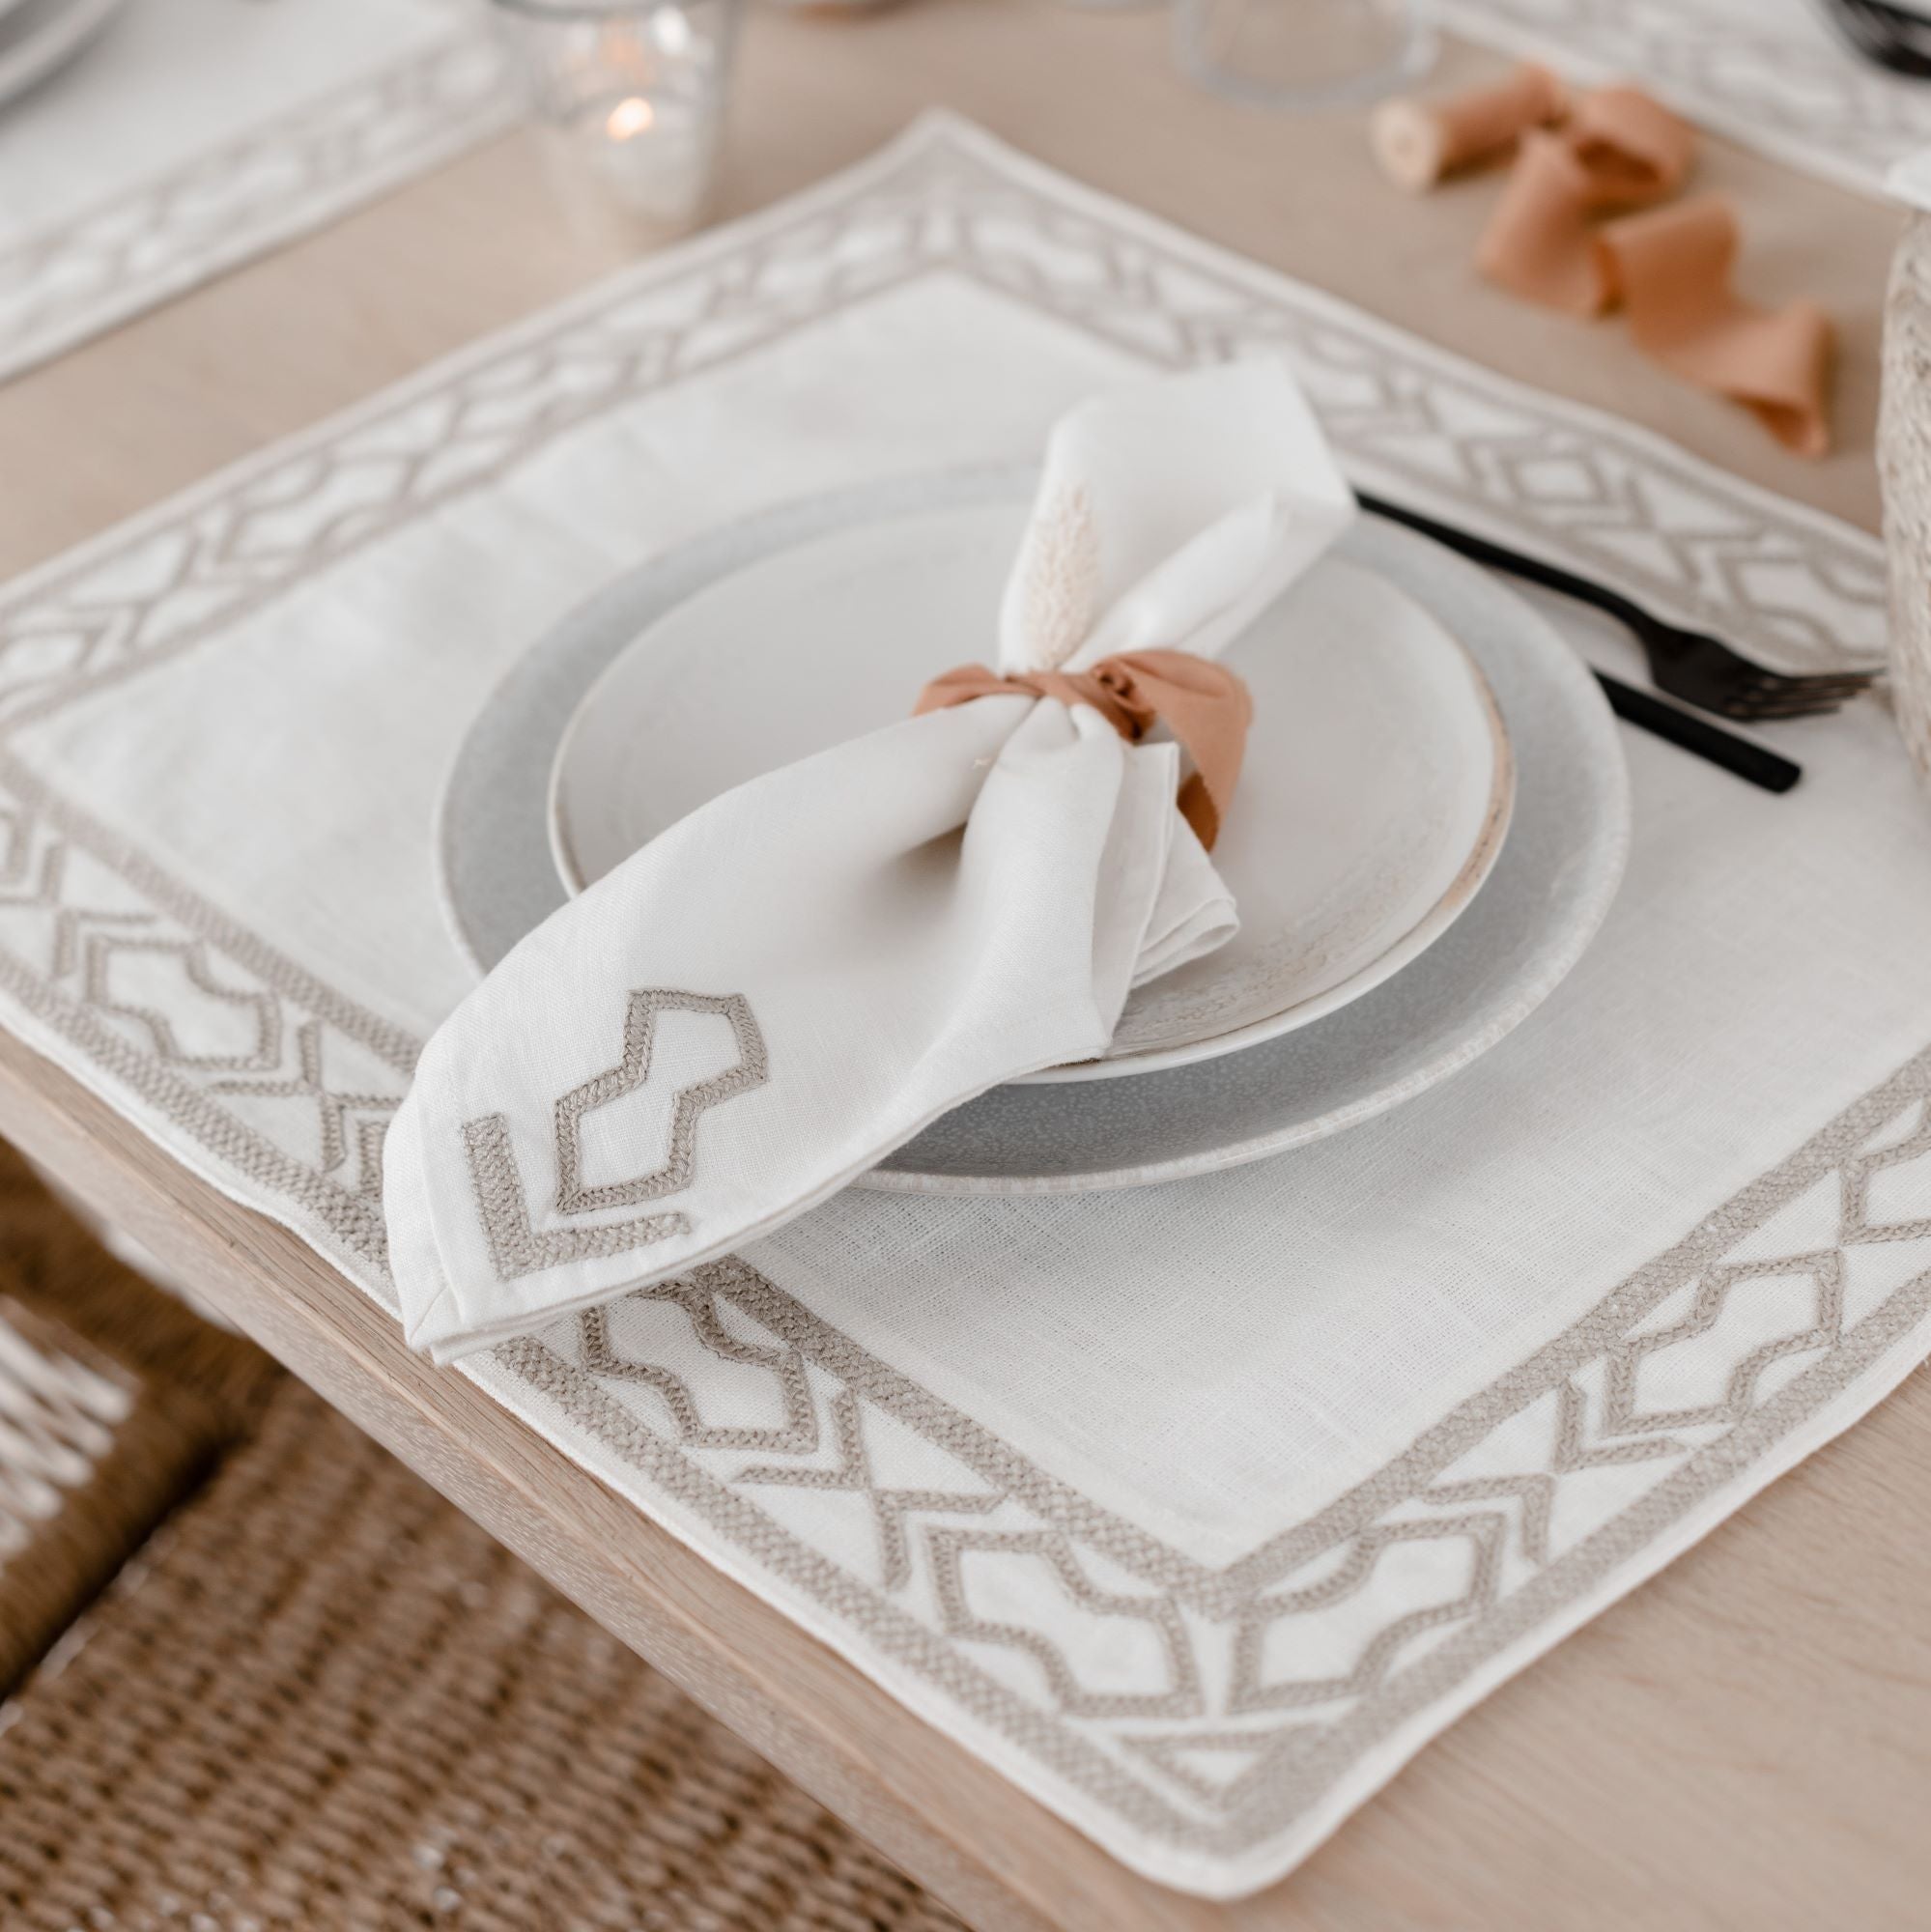 Tablescape with linen placemats and napkins from artha collections